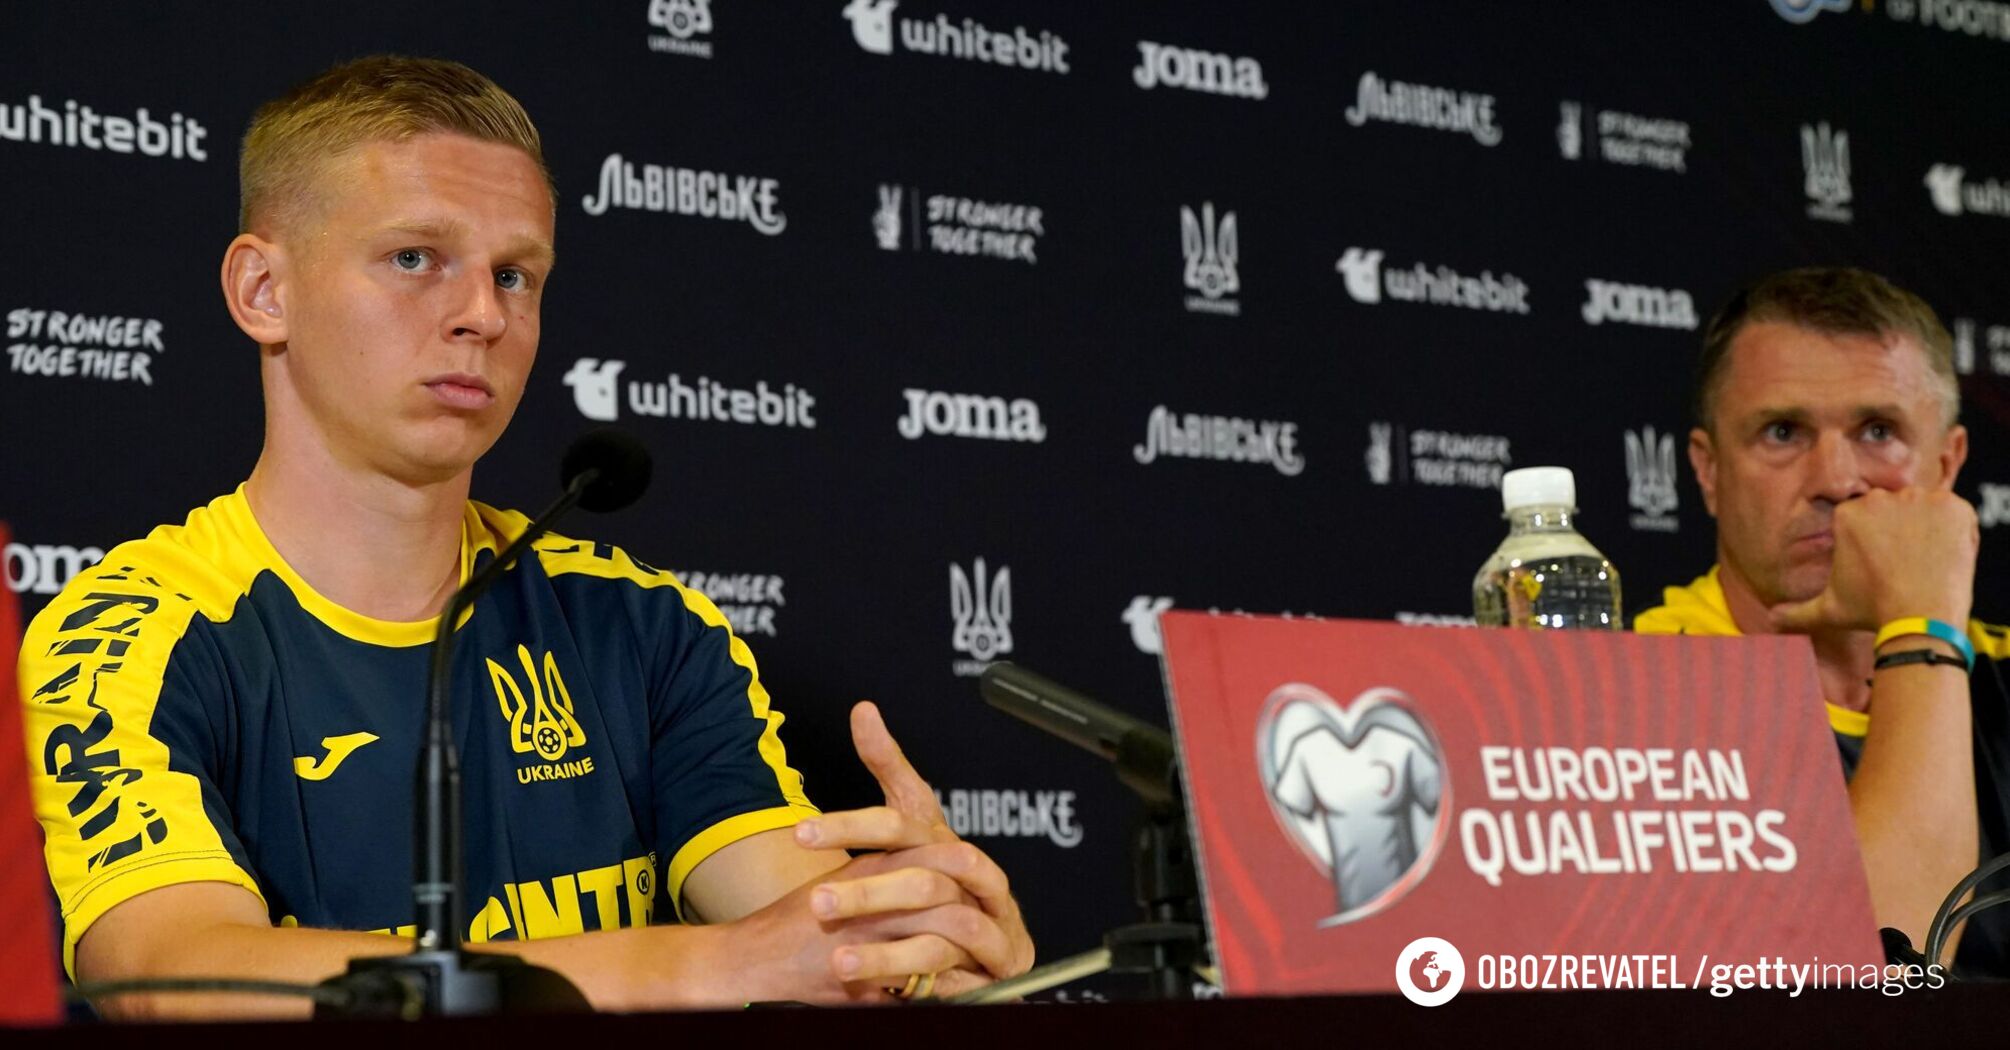 Going against Rebrov: Burbas says Zinchenko had an open conflict with the coach several months ago